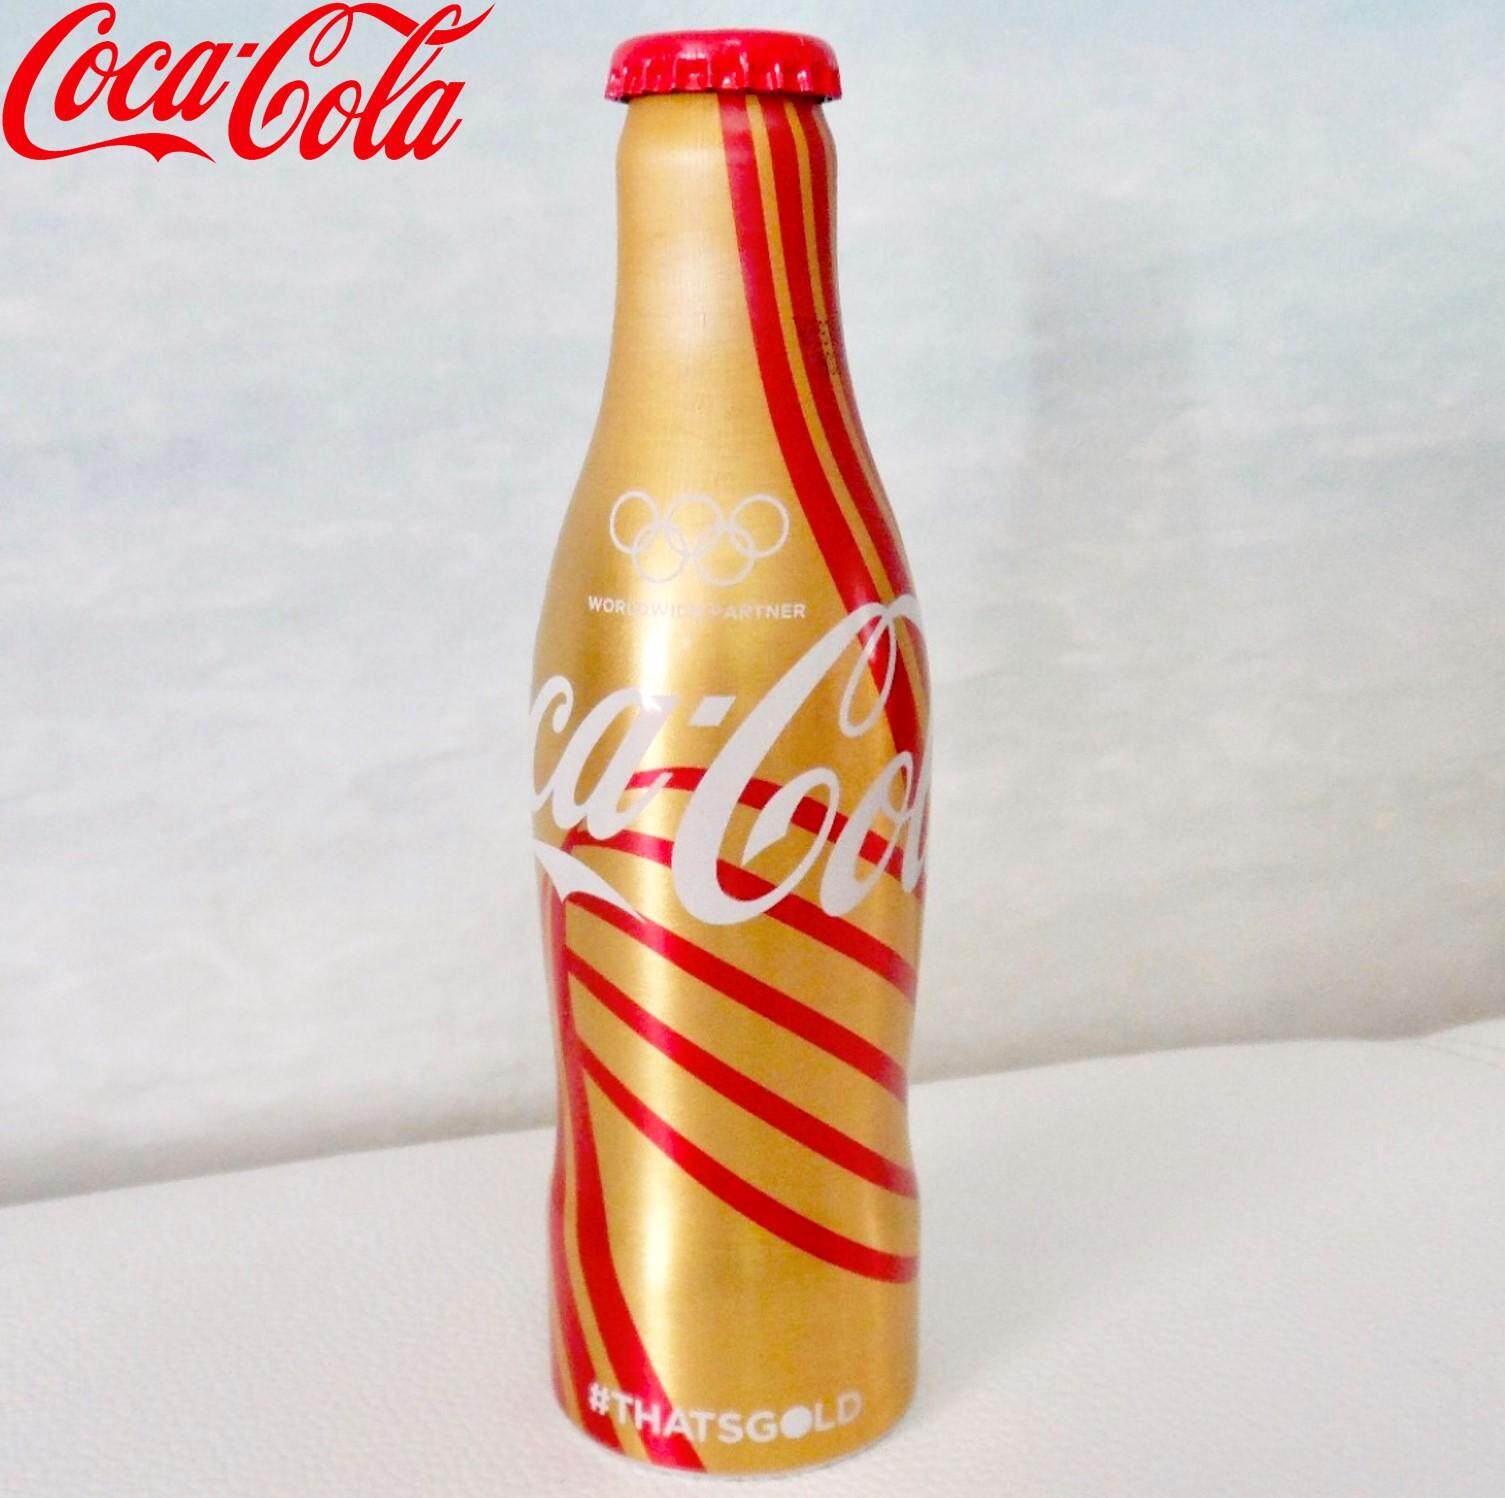 Coca-Cola Products for the Best Prices in Malaysia